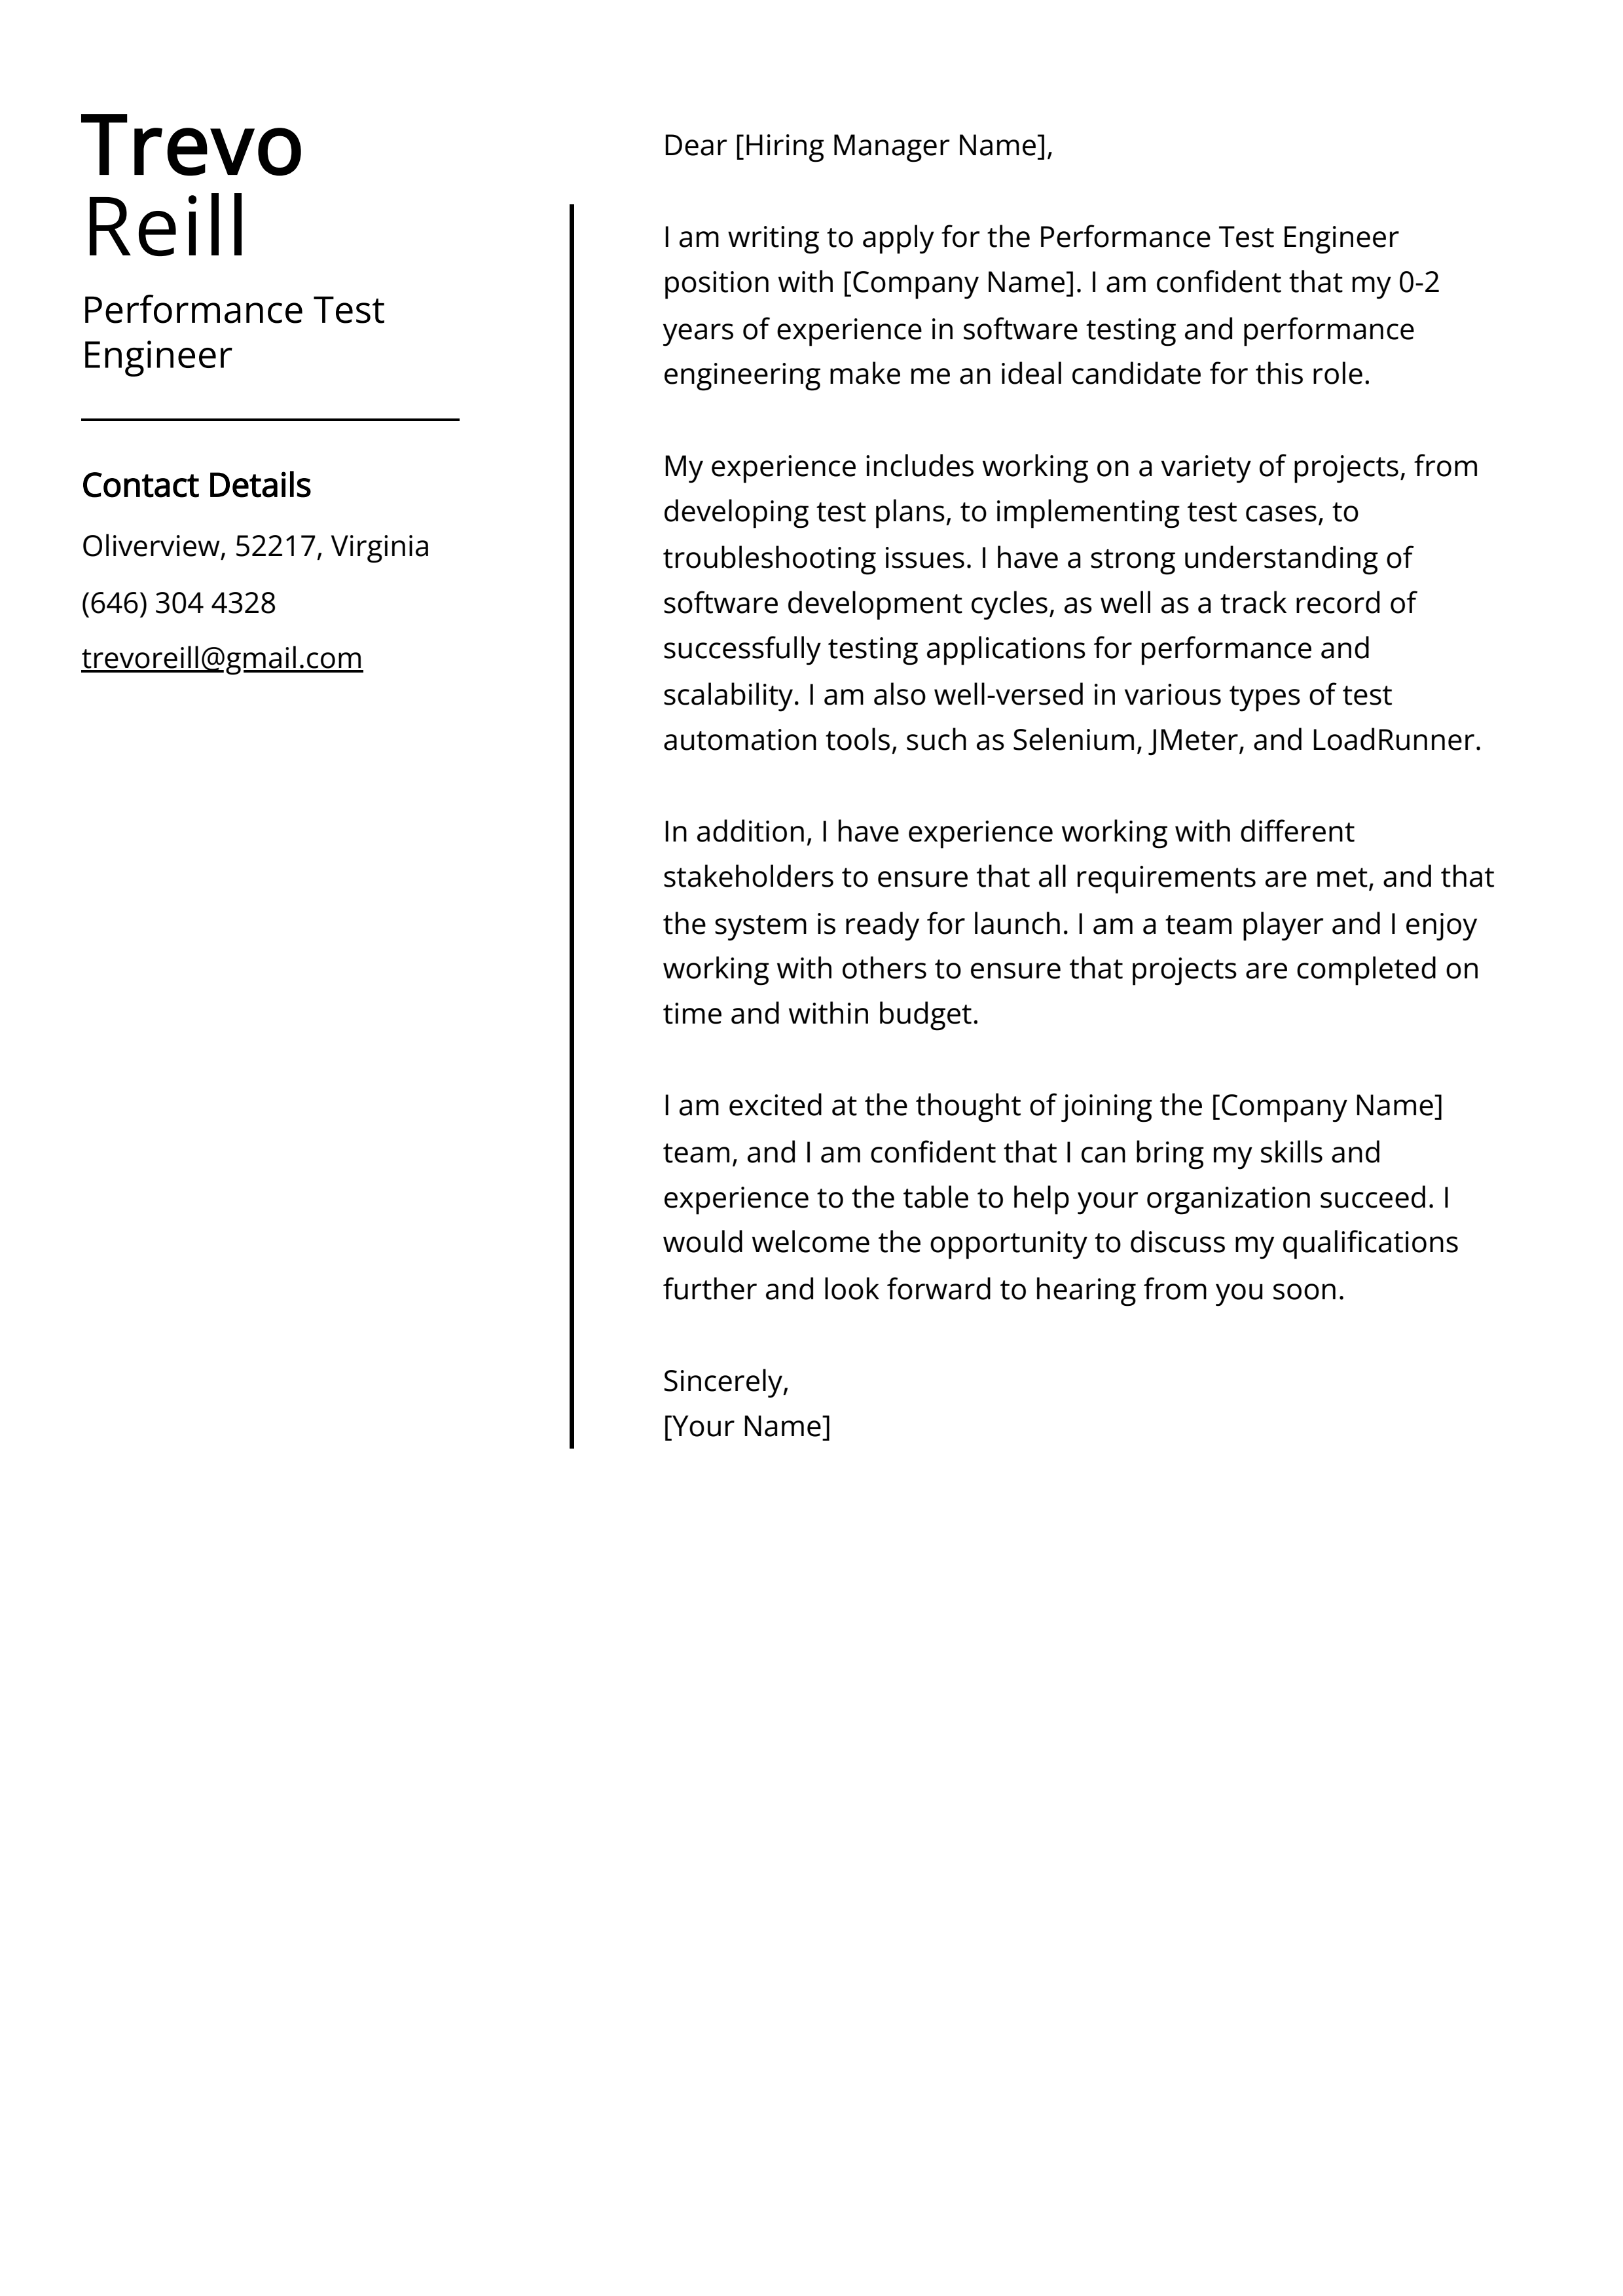 Performance Test Engineer Cover Letter Example